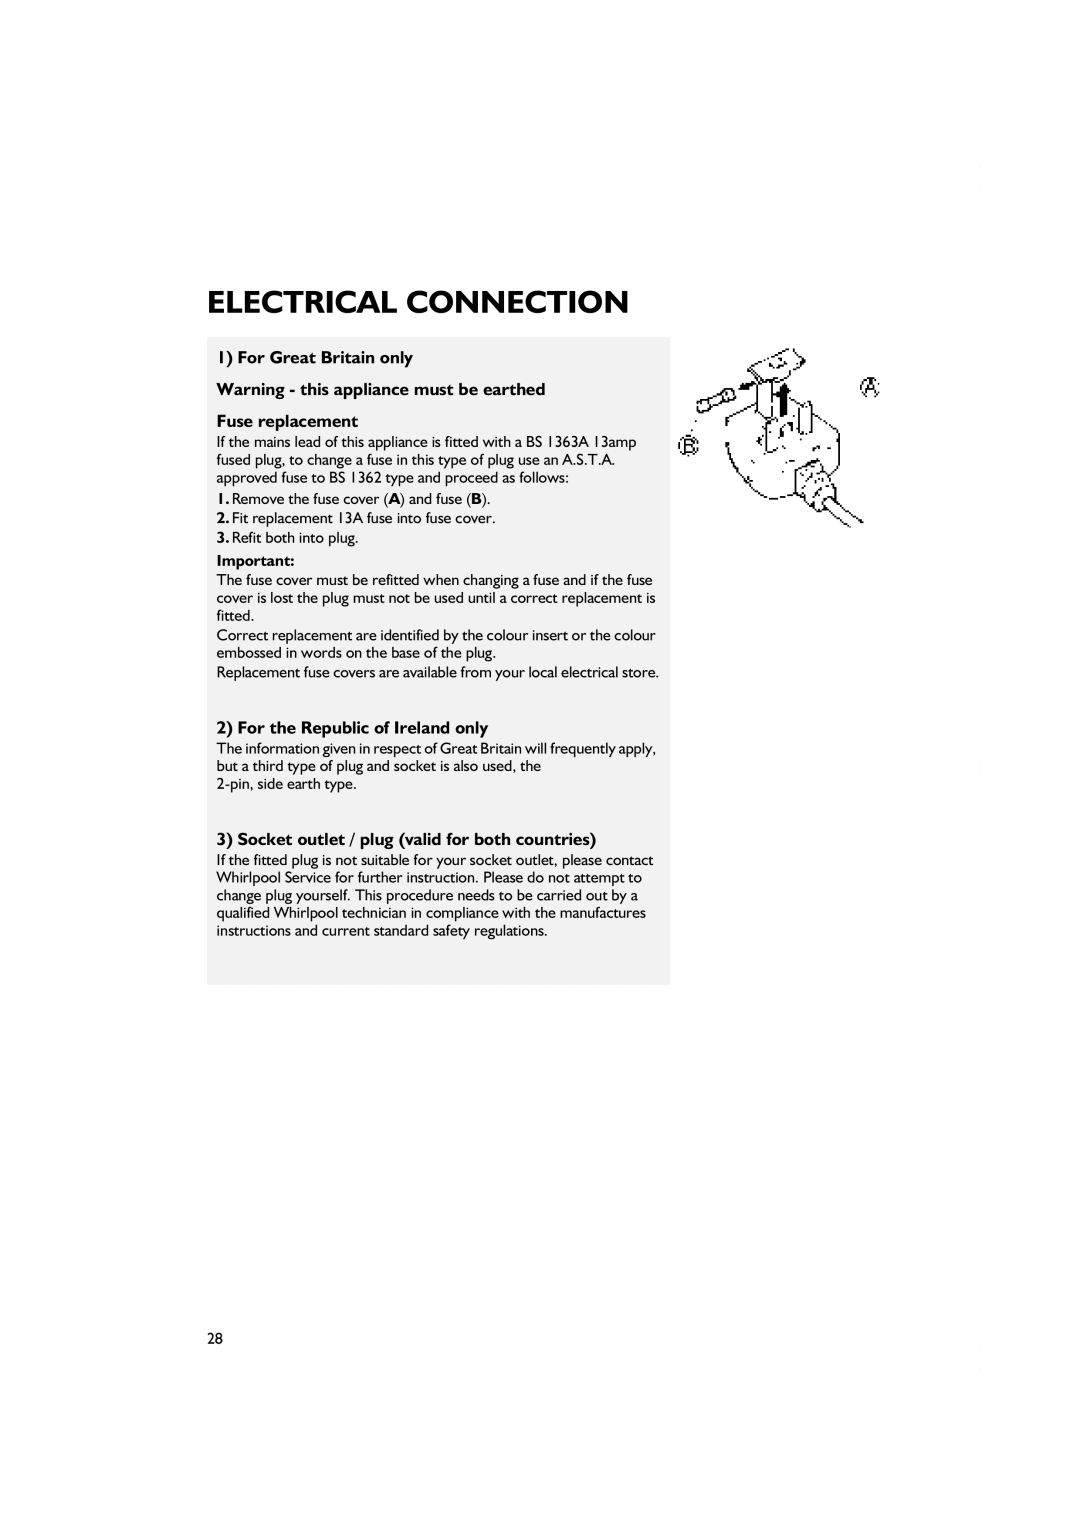 Smeg CR328APZD Electrical Connection, For Great Britain only Warning - this appliance must be earthed, Fuse replacement 